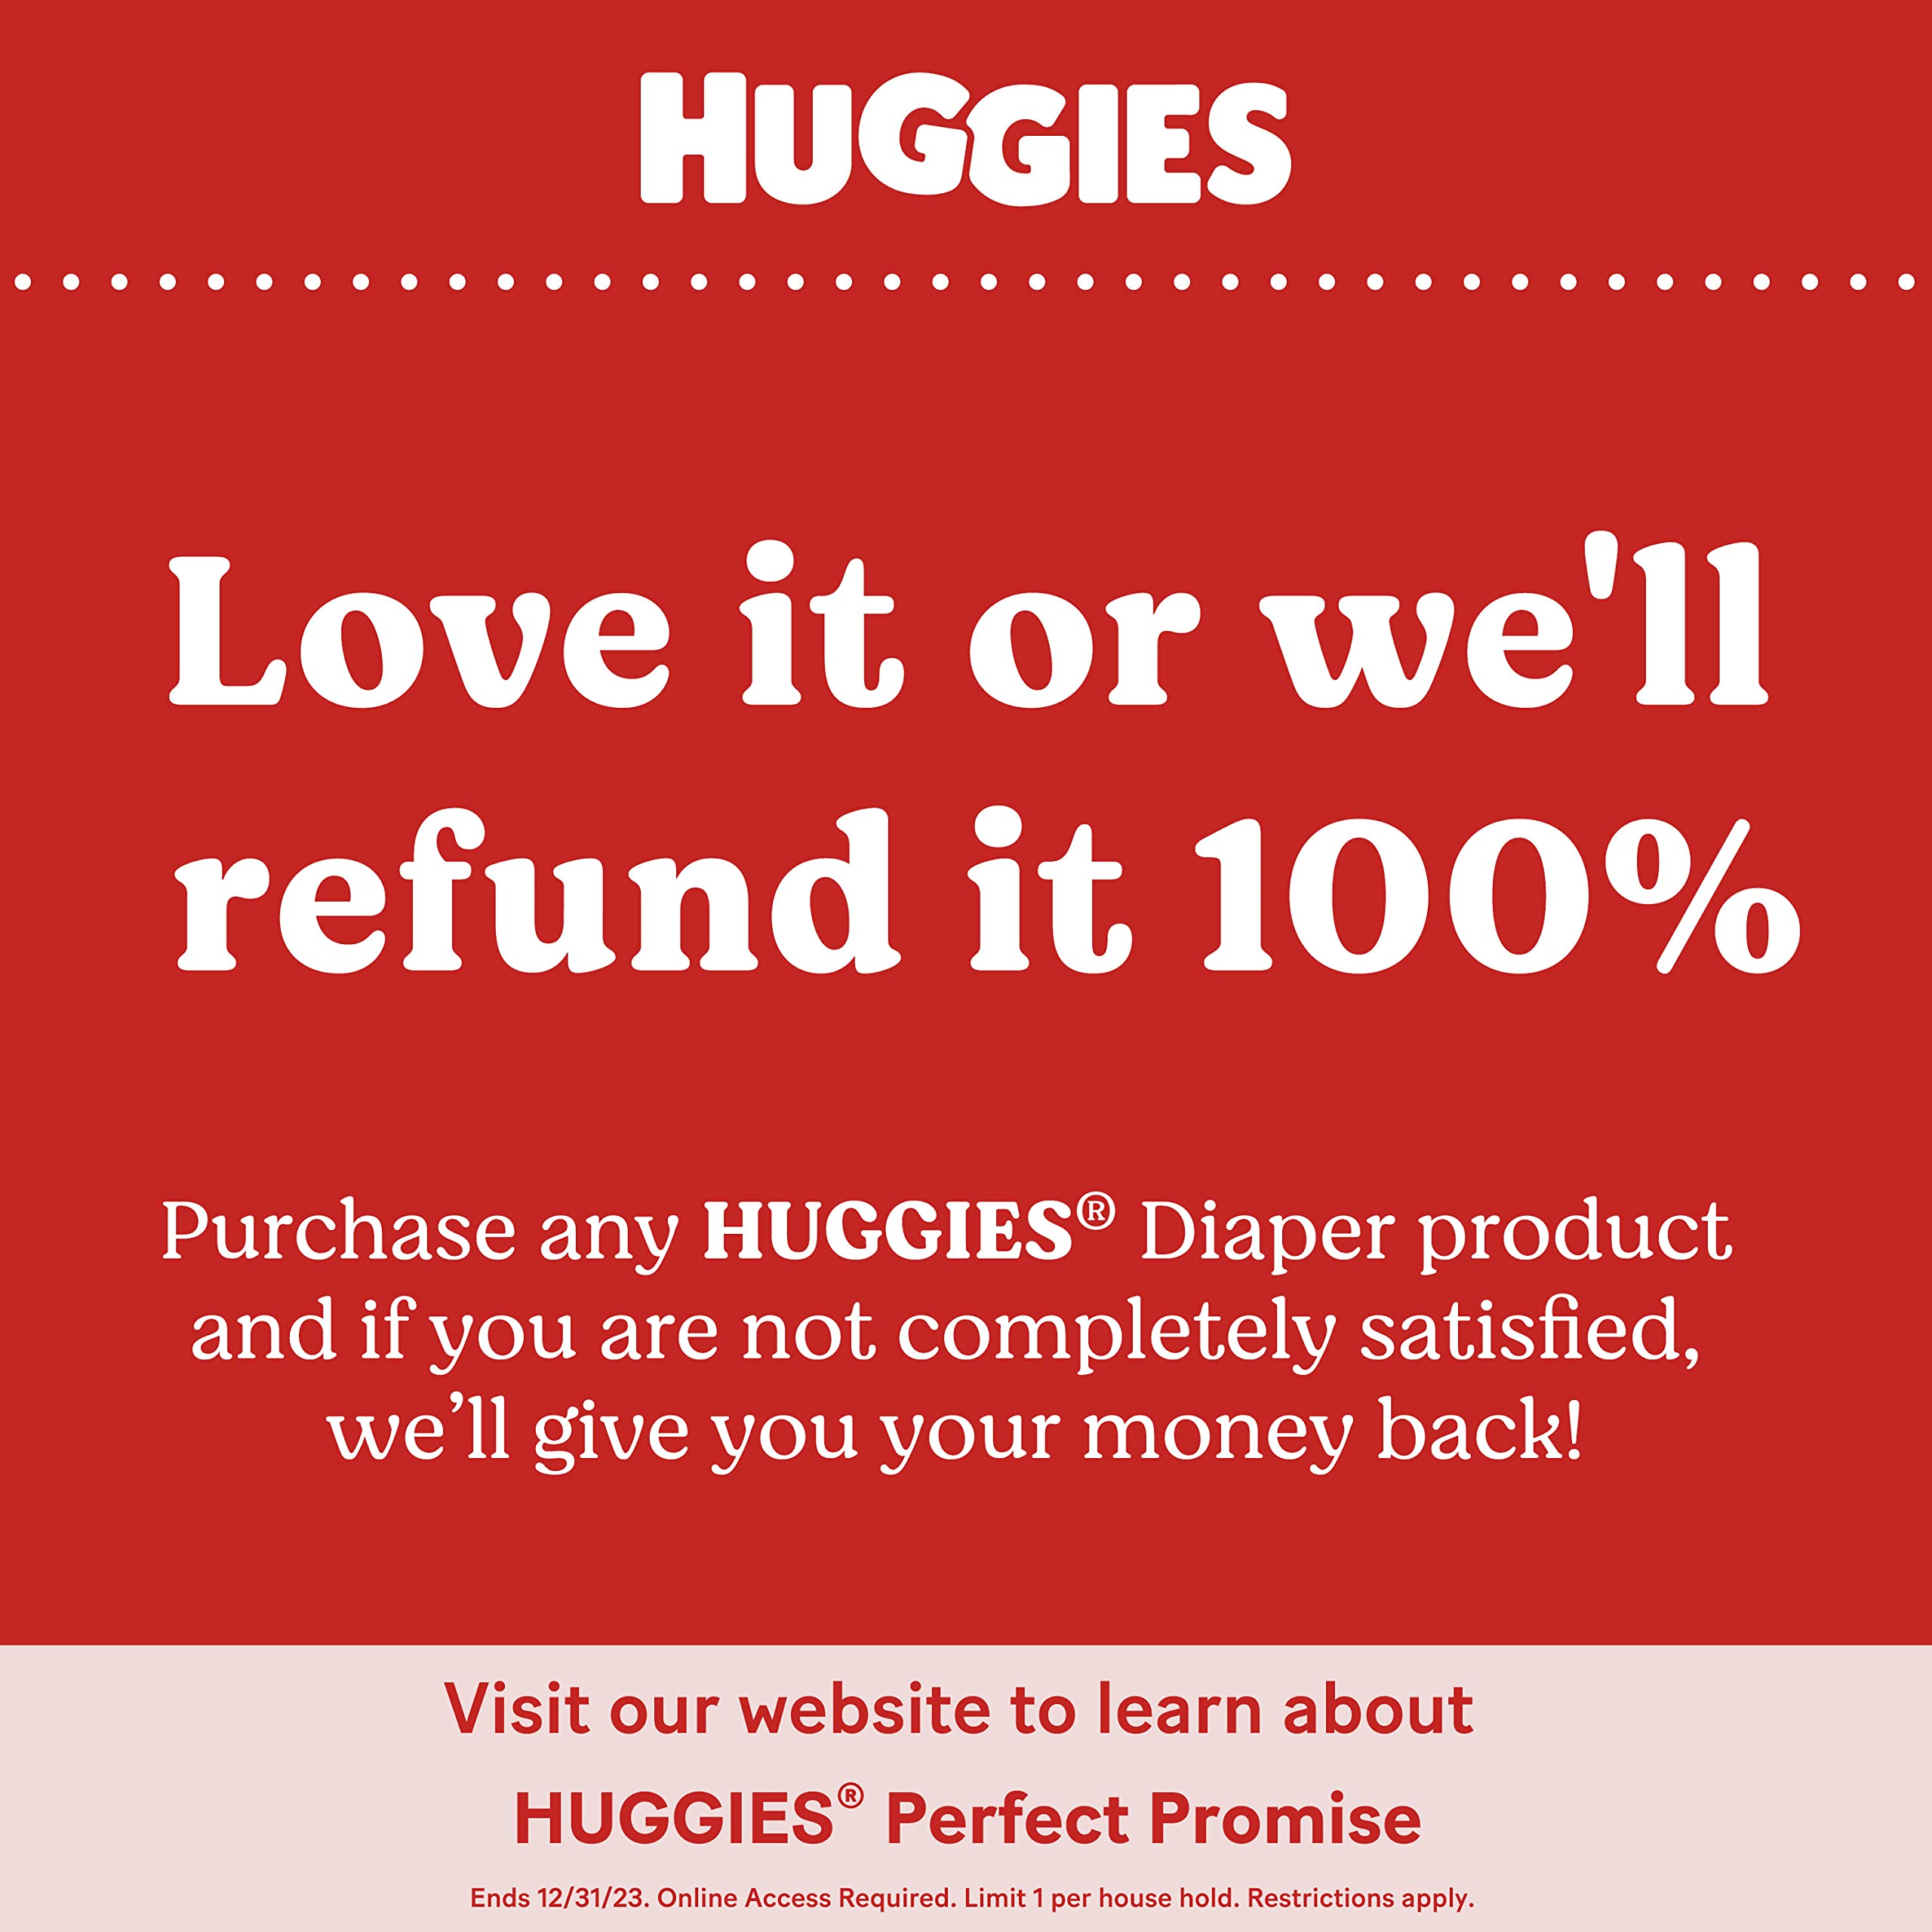 Huggies Special Delivery Hypoallergenic Baby Diapers Size 2 (12-18 lbs), 64 Ct, Fragrance Free, Safe for Sensitive Skin